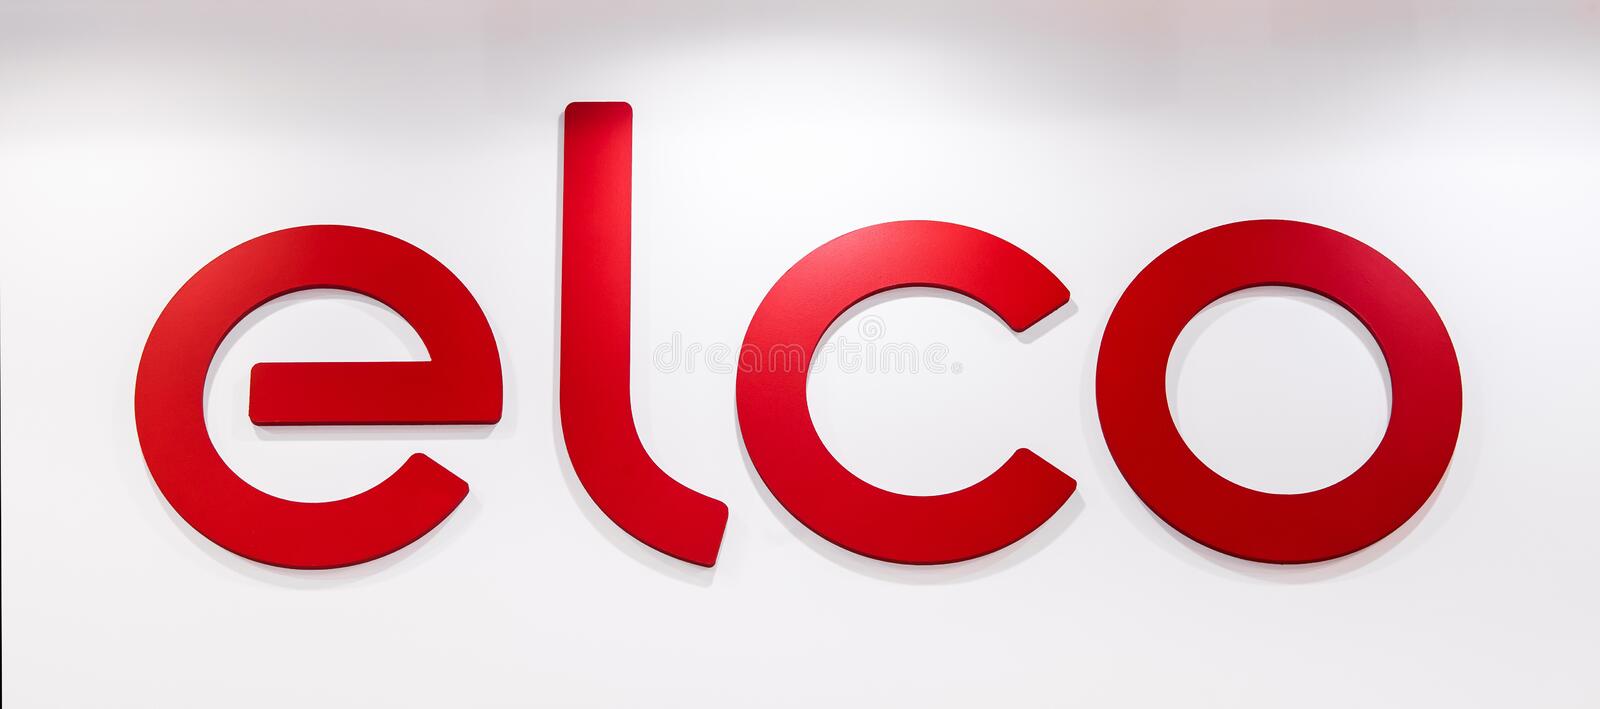 elco-company-logo-plastic-red-letters-white-wall-moscow-russia-february-new-brand-ariston-therm-86291081